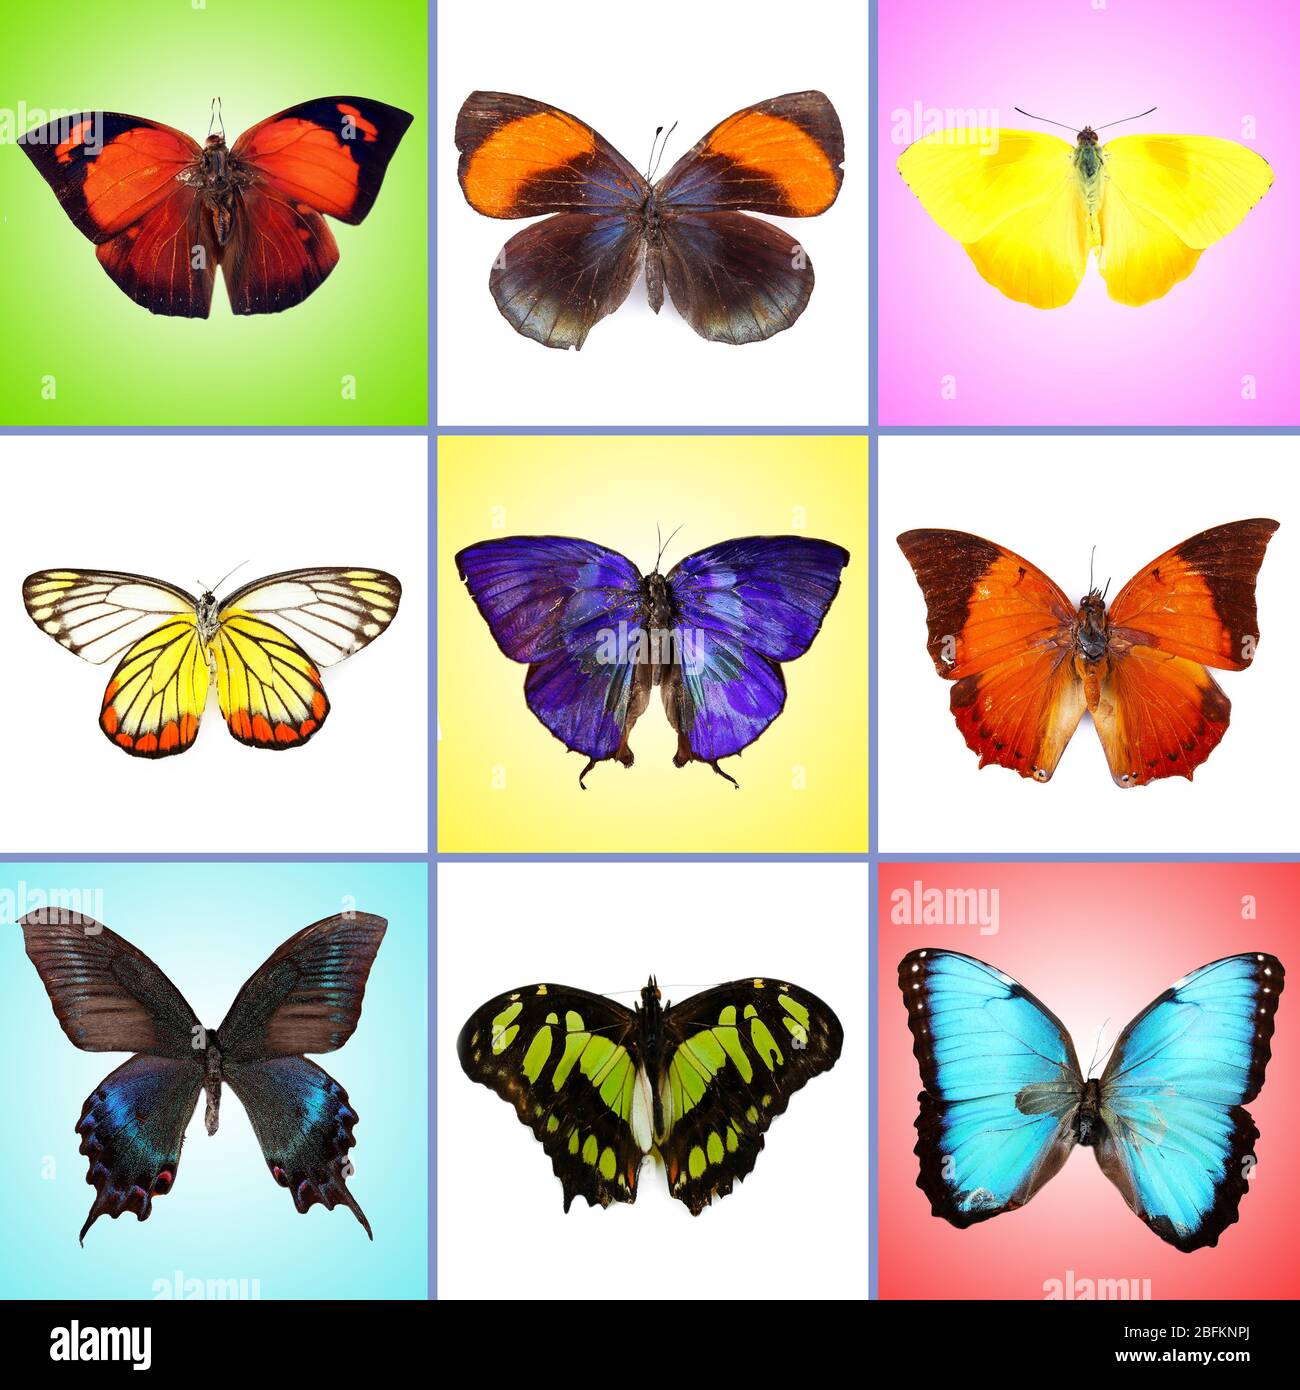 Butterflies collection on bright background Stock Photo